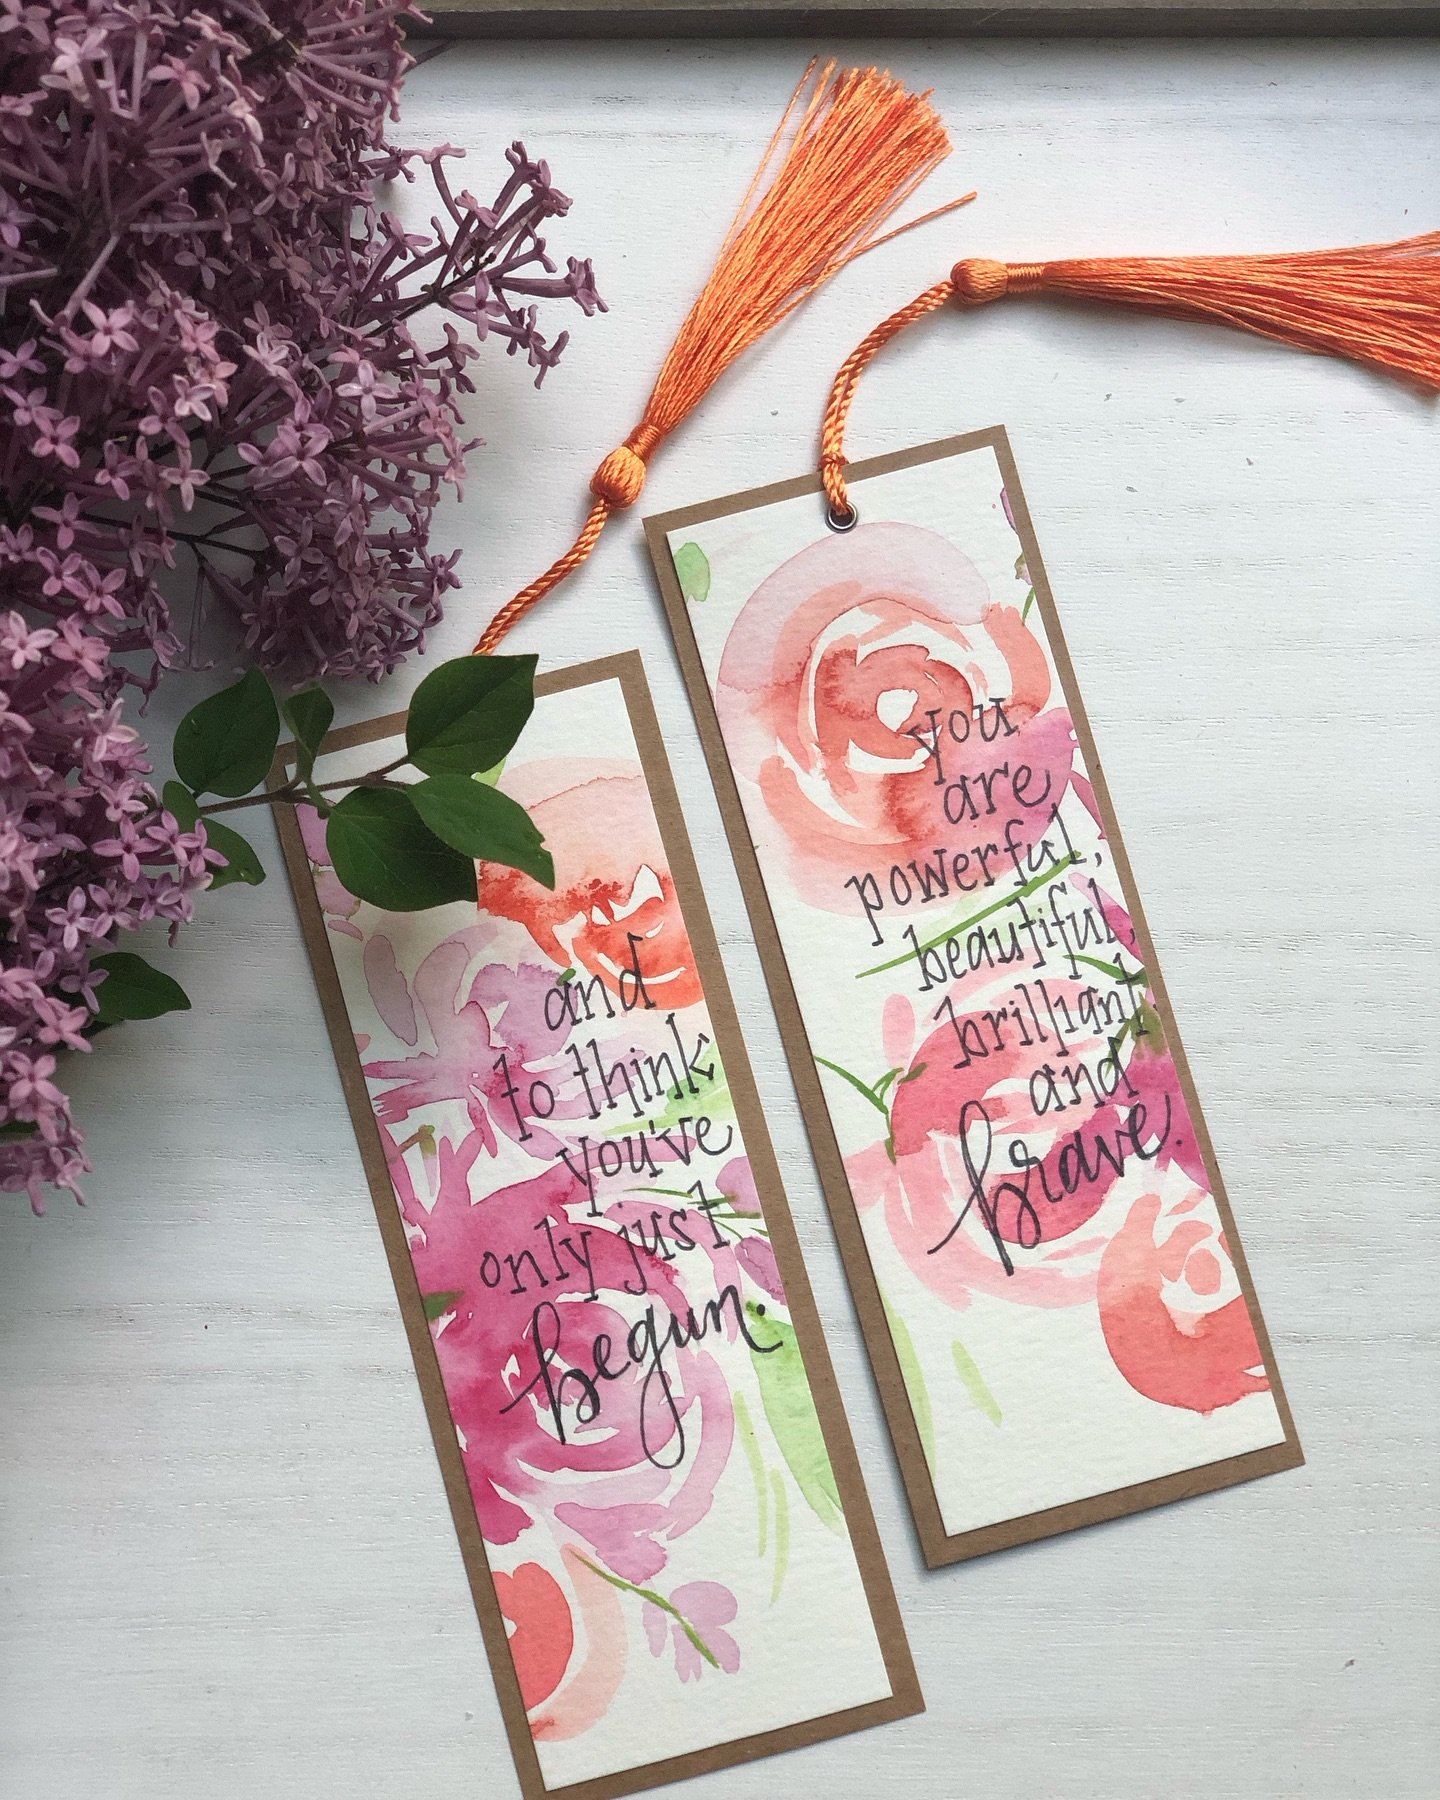 Slowly reentering the real world post vacation. Diving back in with a big admin week and also some creativity. 
New Hampshire is in full bloom for our return and I&rsquo;m living for these lilacs. Love how they compliment these hand painted bookmarks